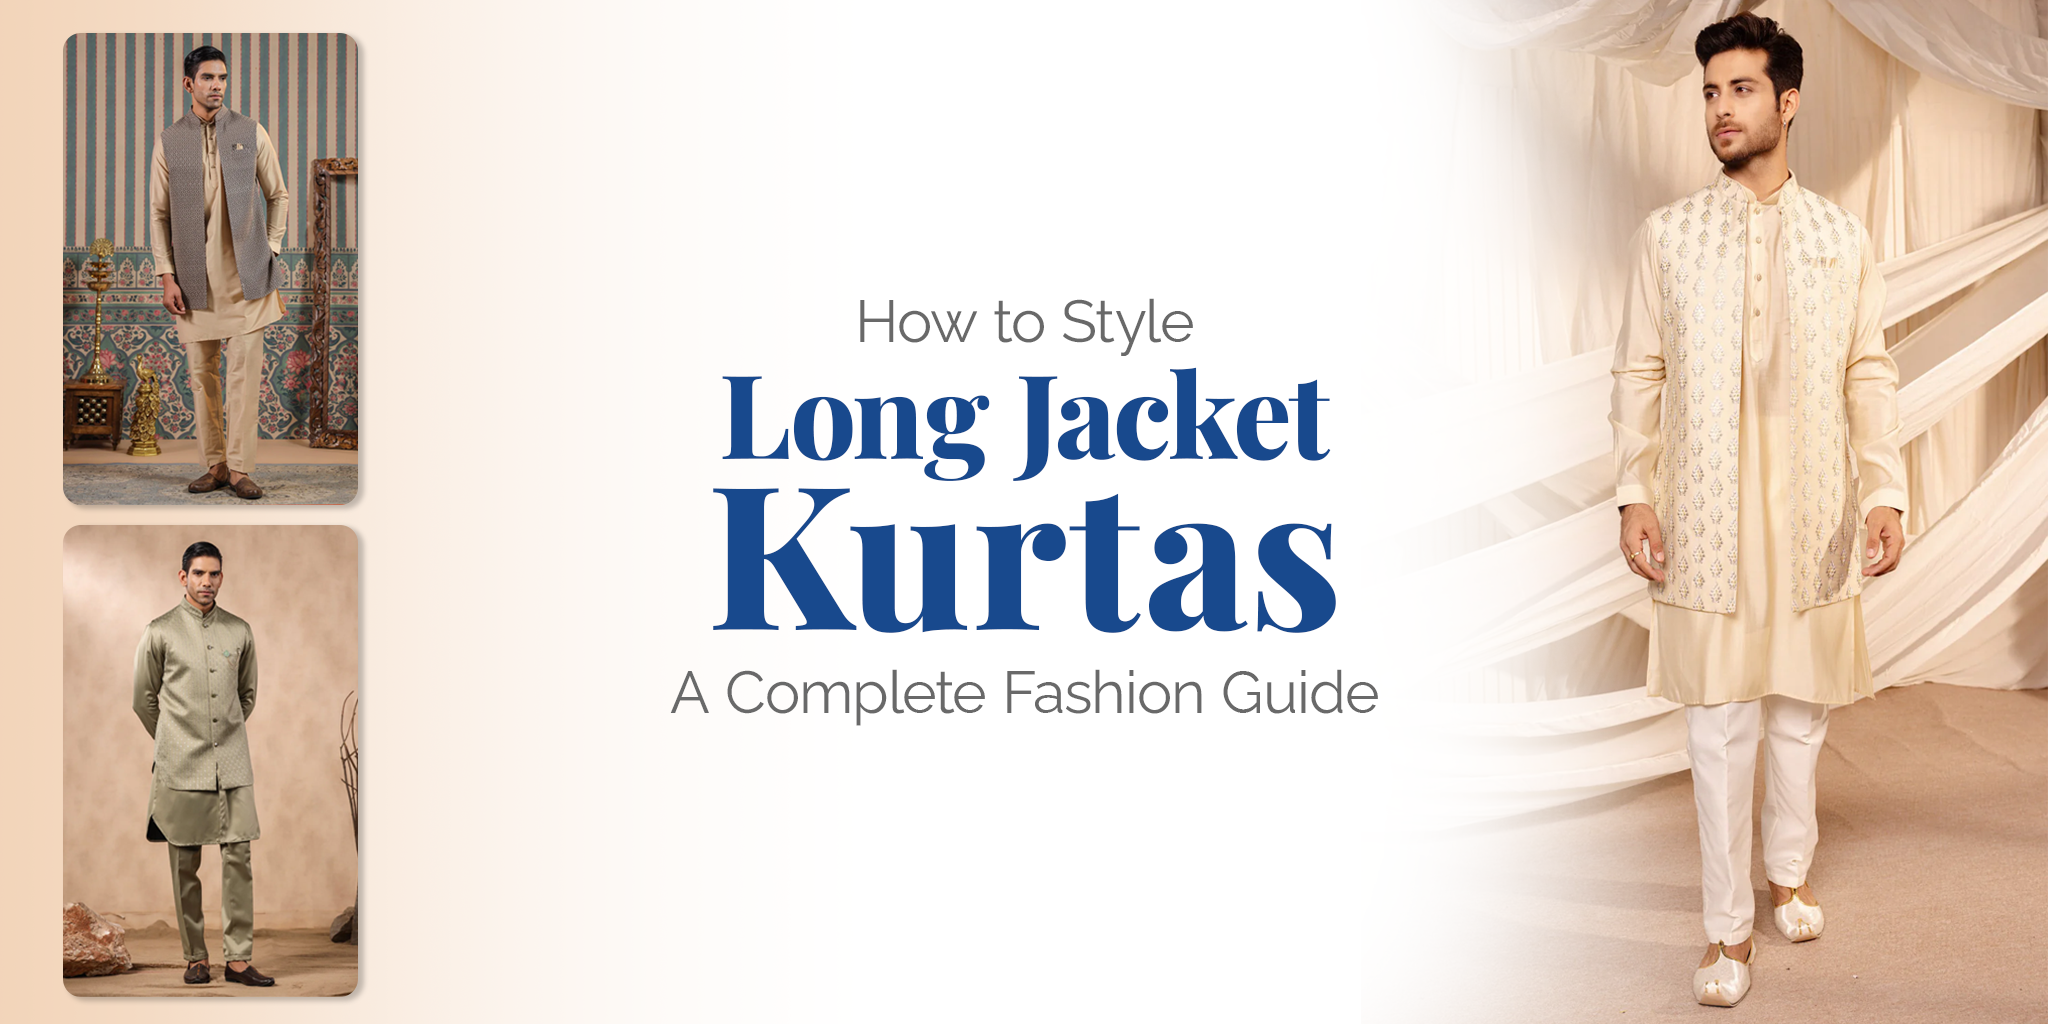 How to Style Long Jacket Kurtas: A Complete Fashion Guide